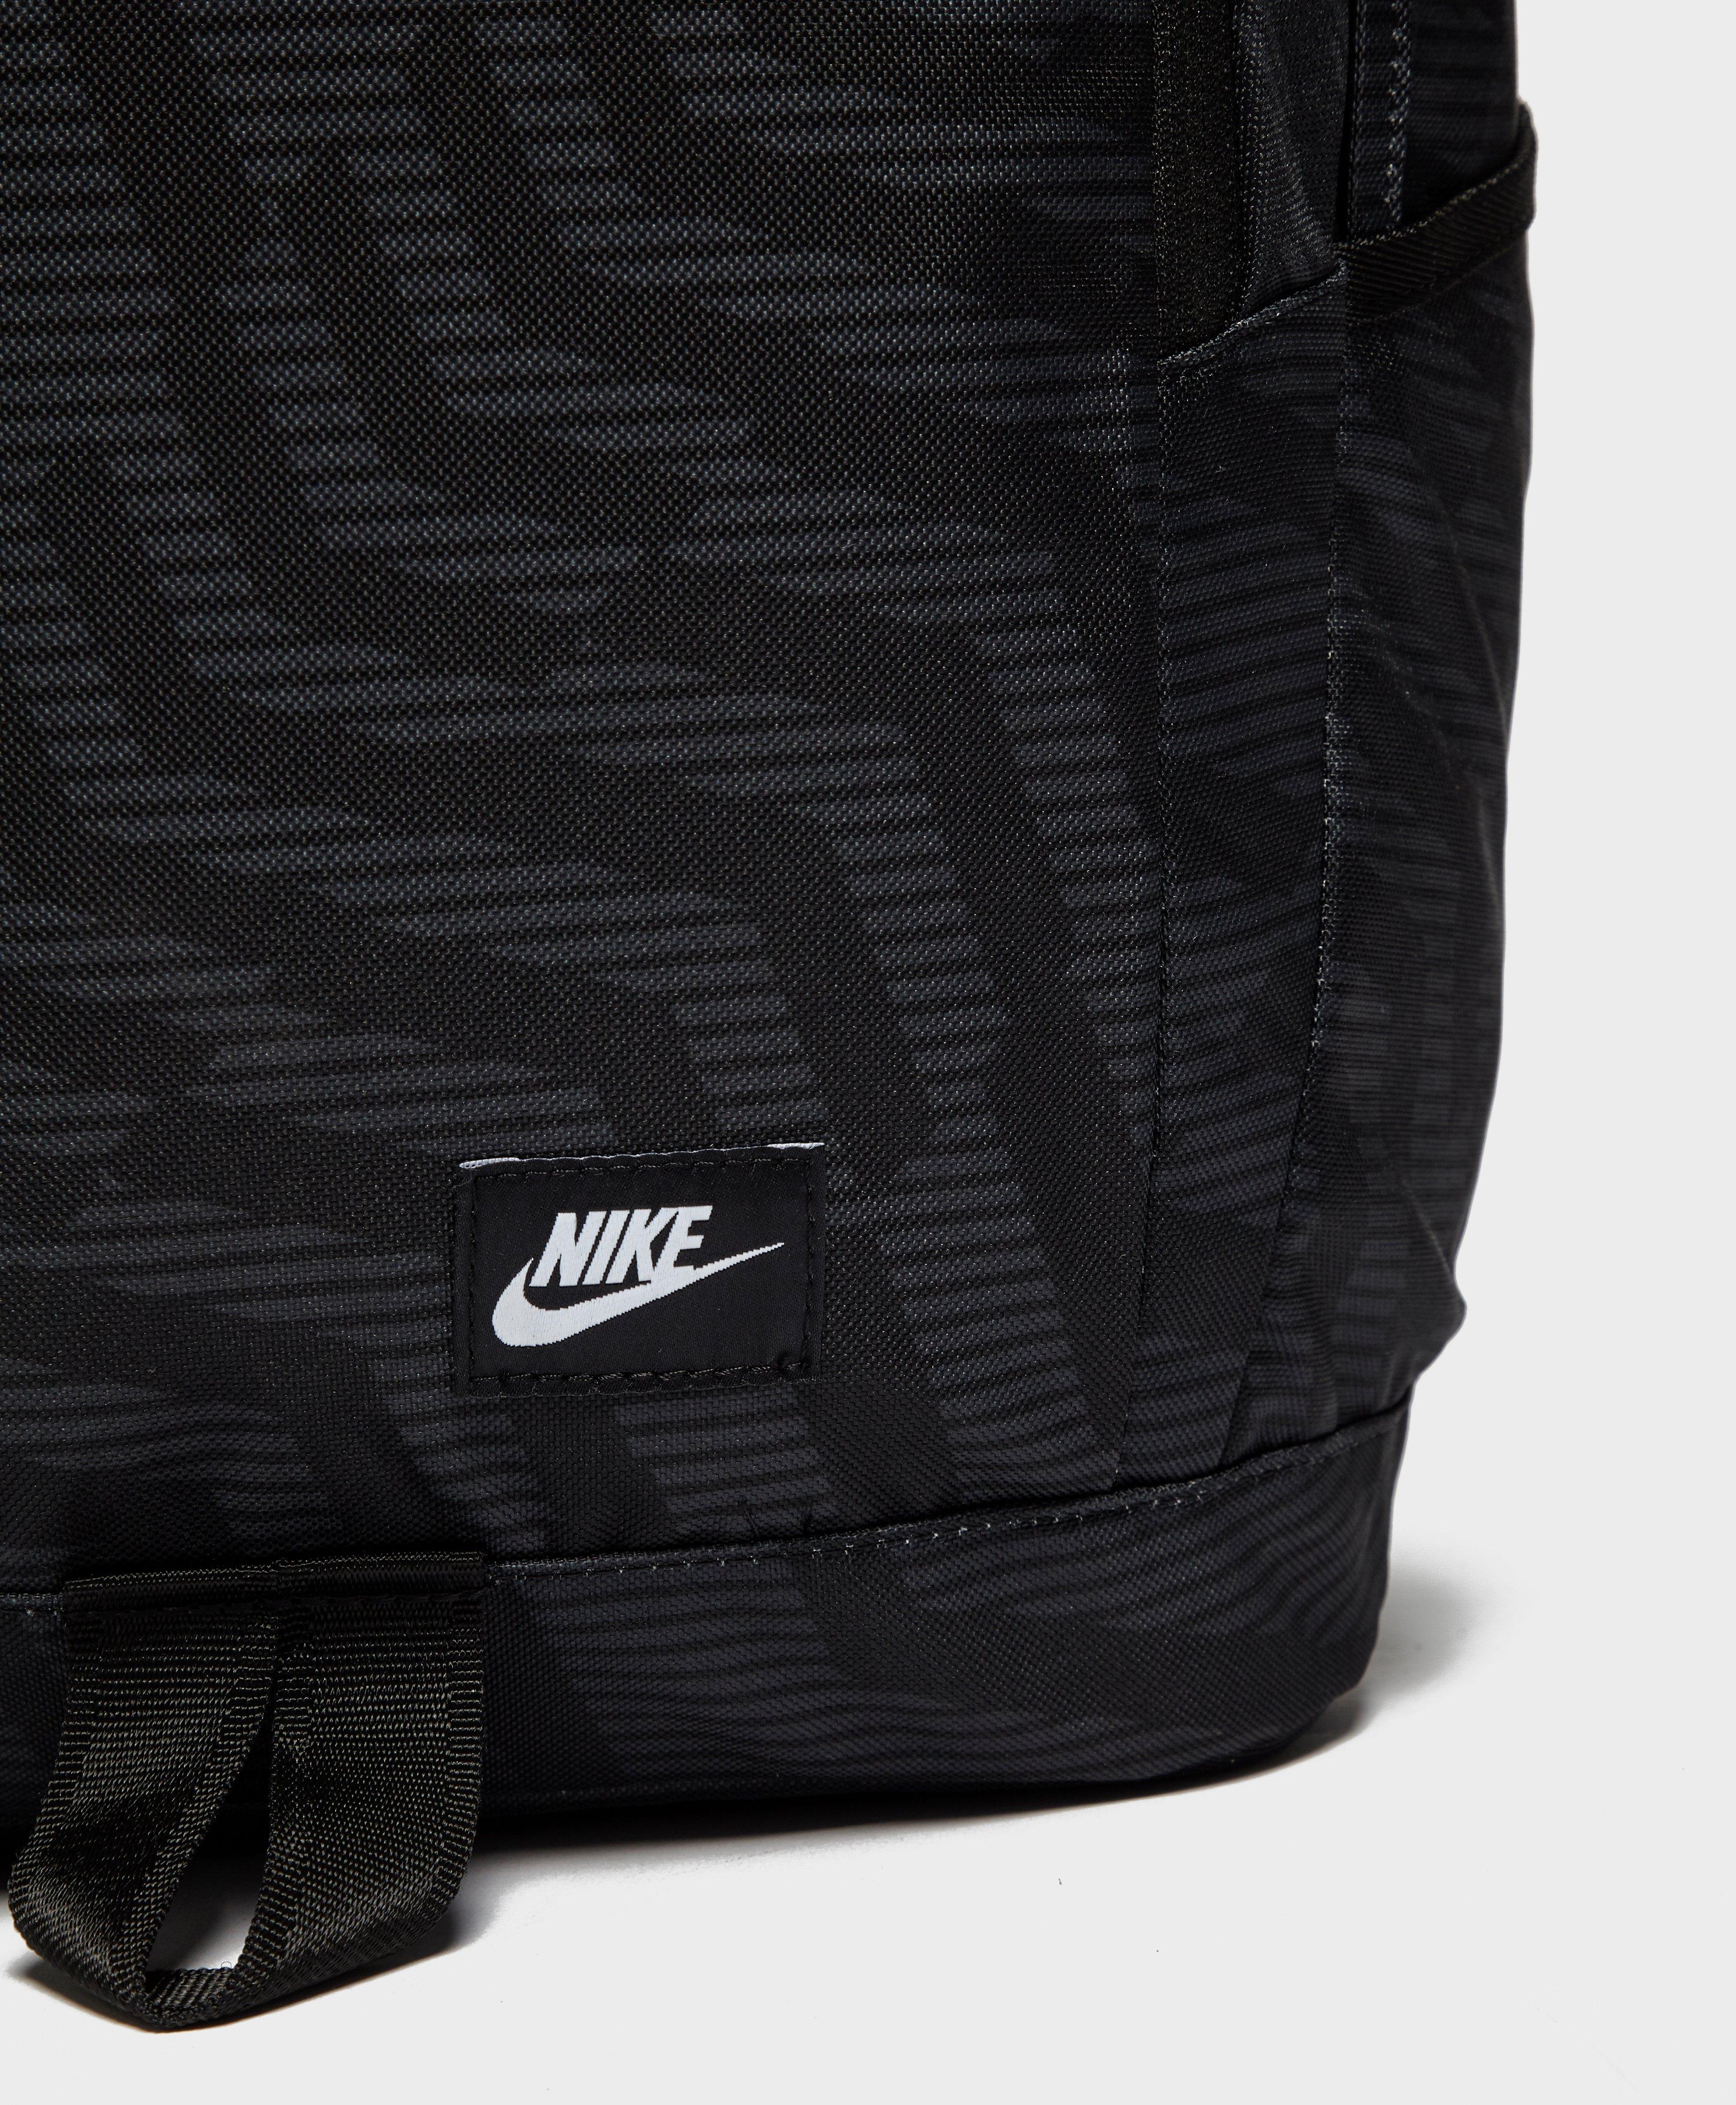 Nike Synthetic Soleday Camo Backpack in Black for Men - Lyst